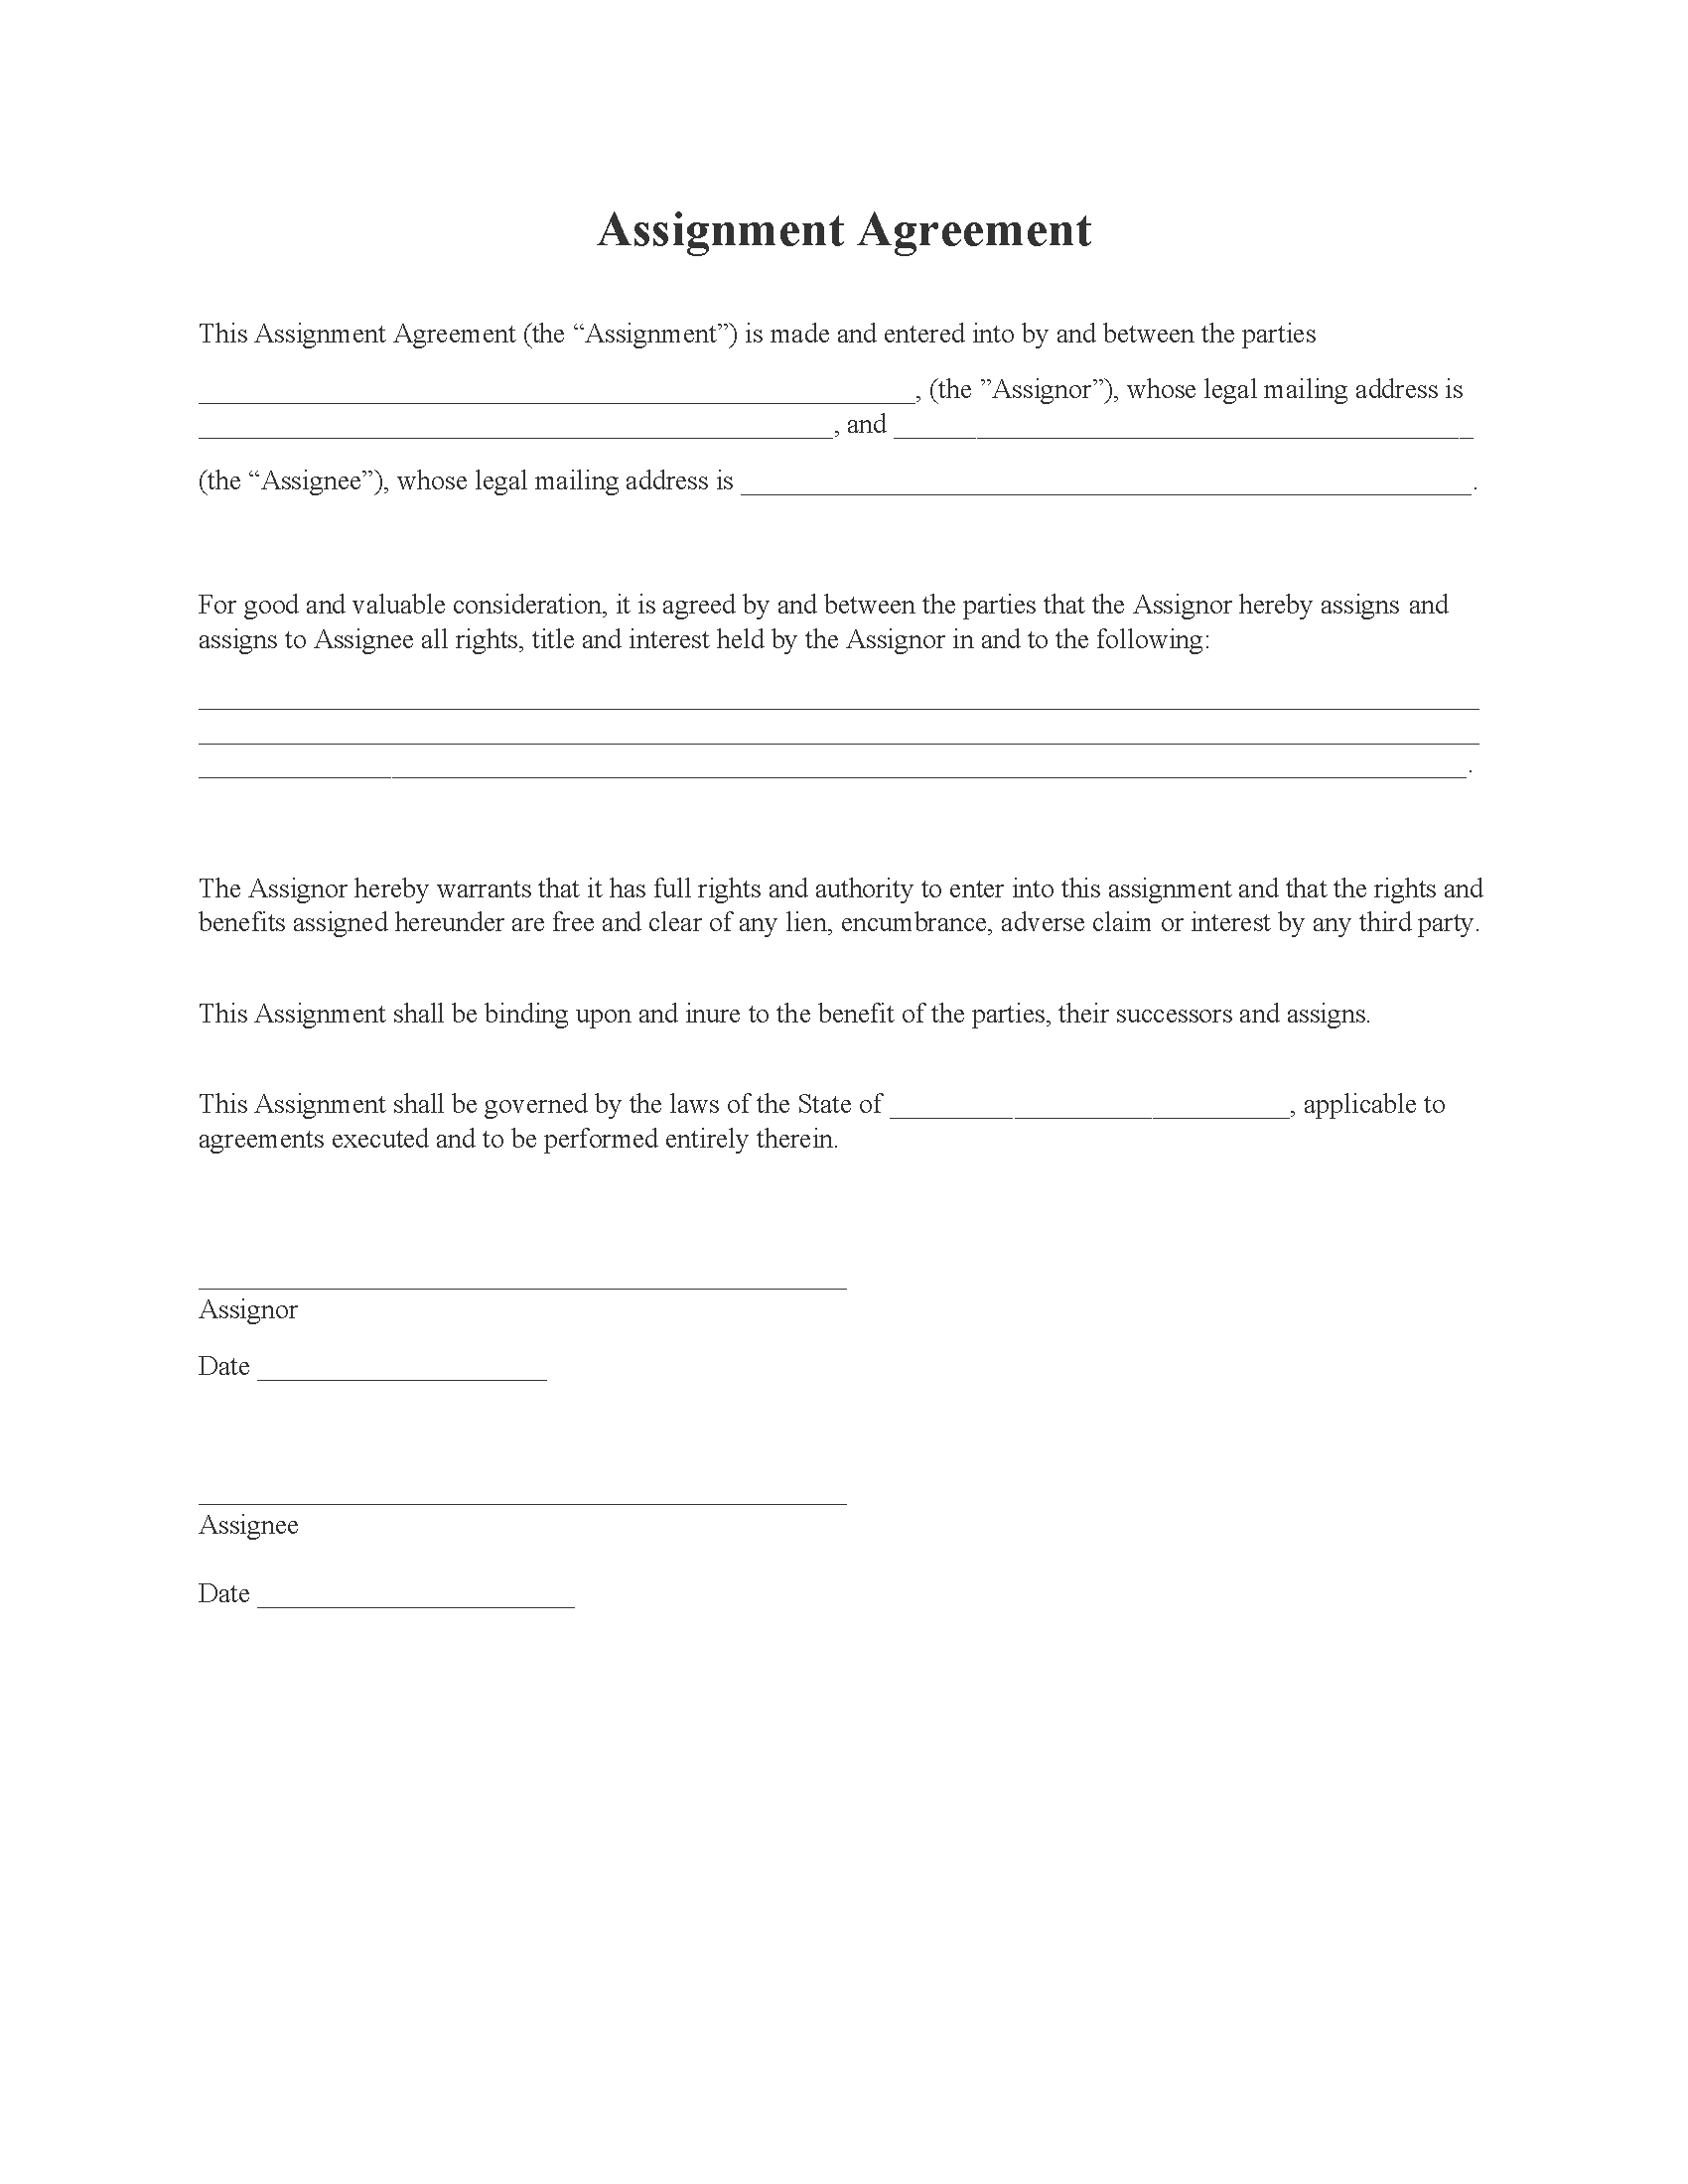 assignment agreement from